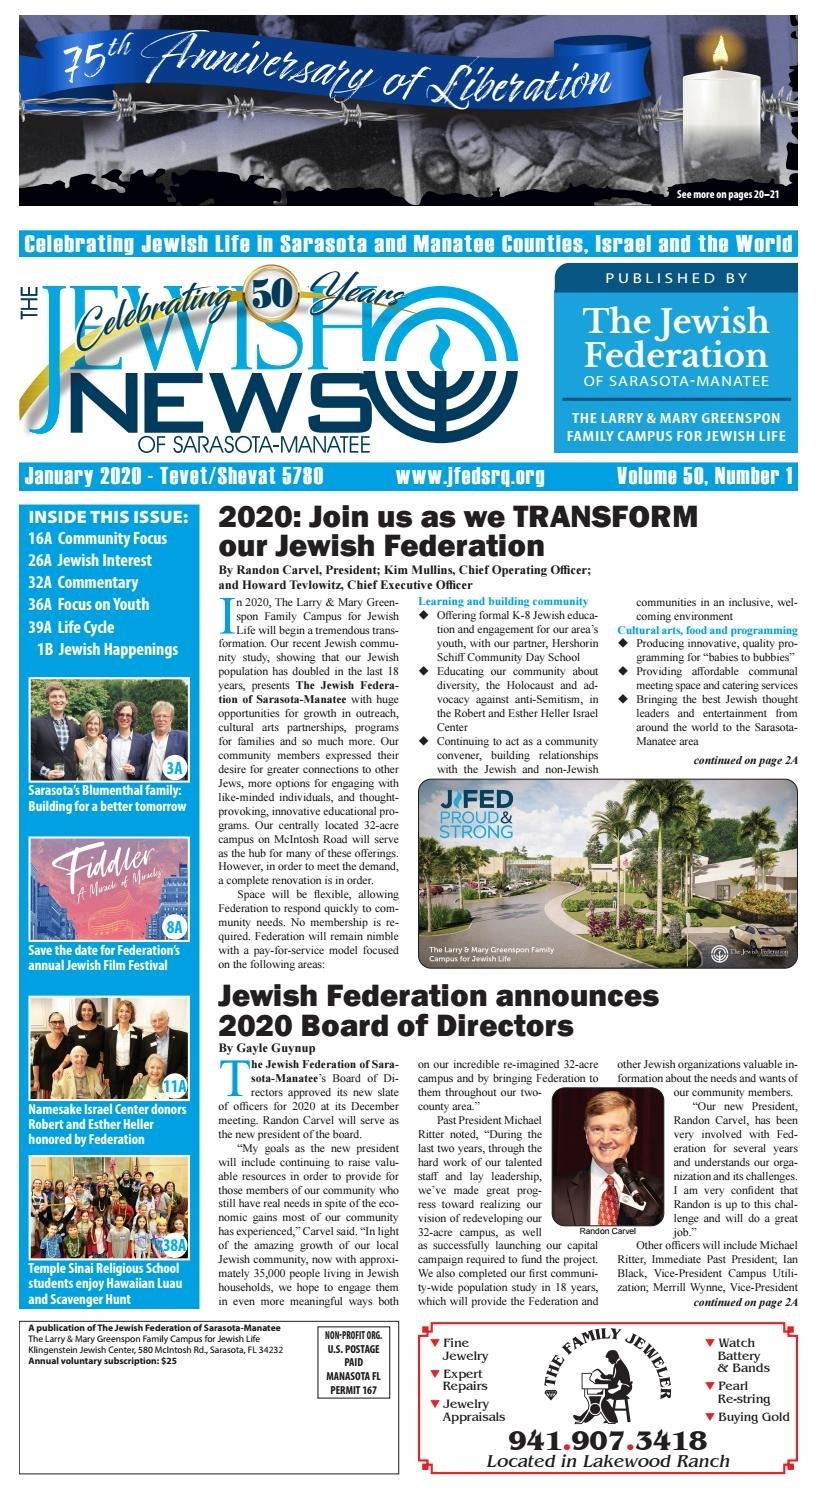 The Jewish News - January 2020 By The Jewish Federation Of Exceptional When The Jewish Federation Of Chicago Will Be Close For Holidays In 2020